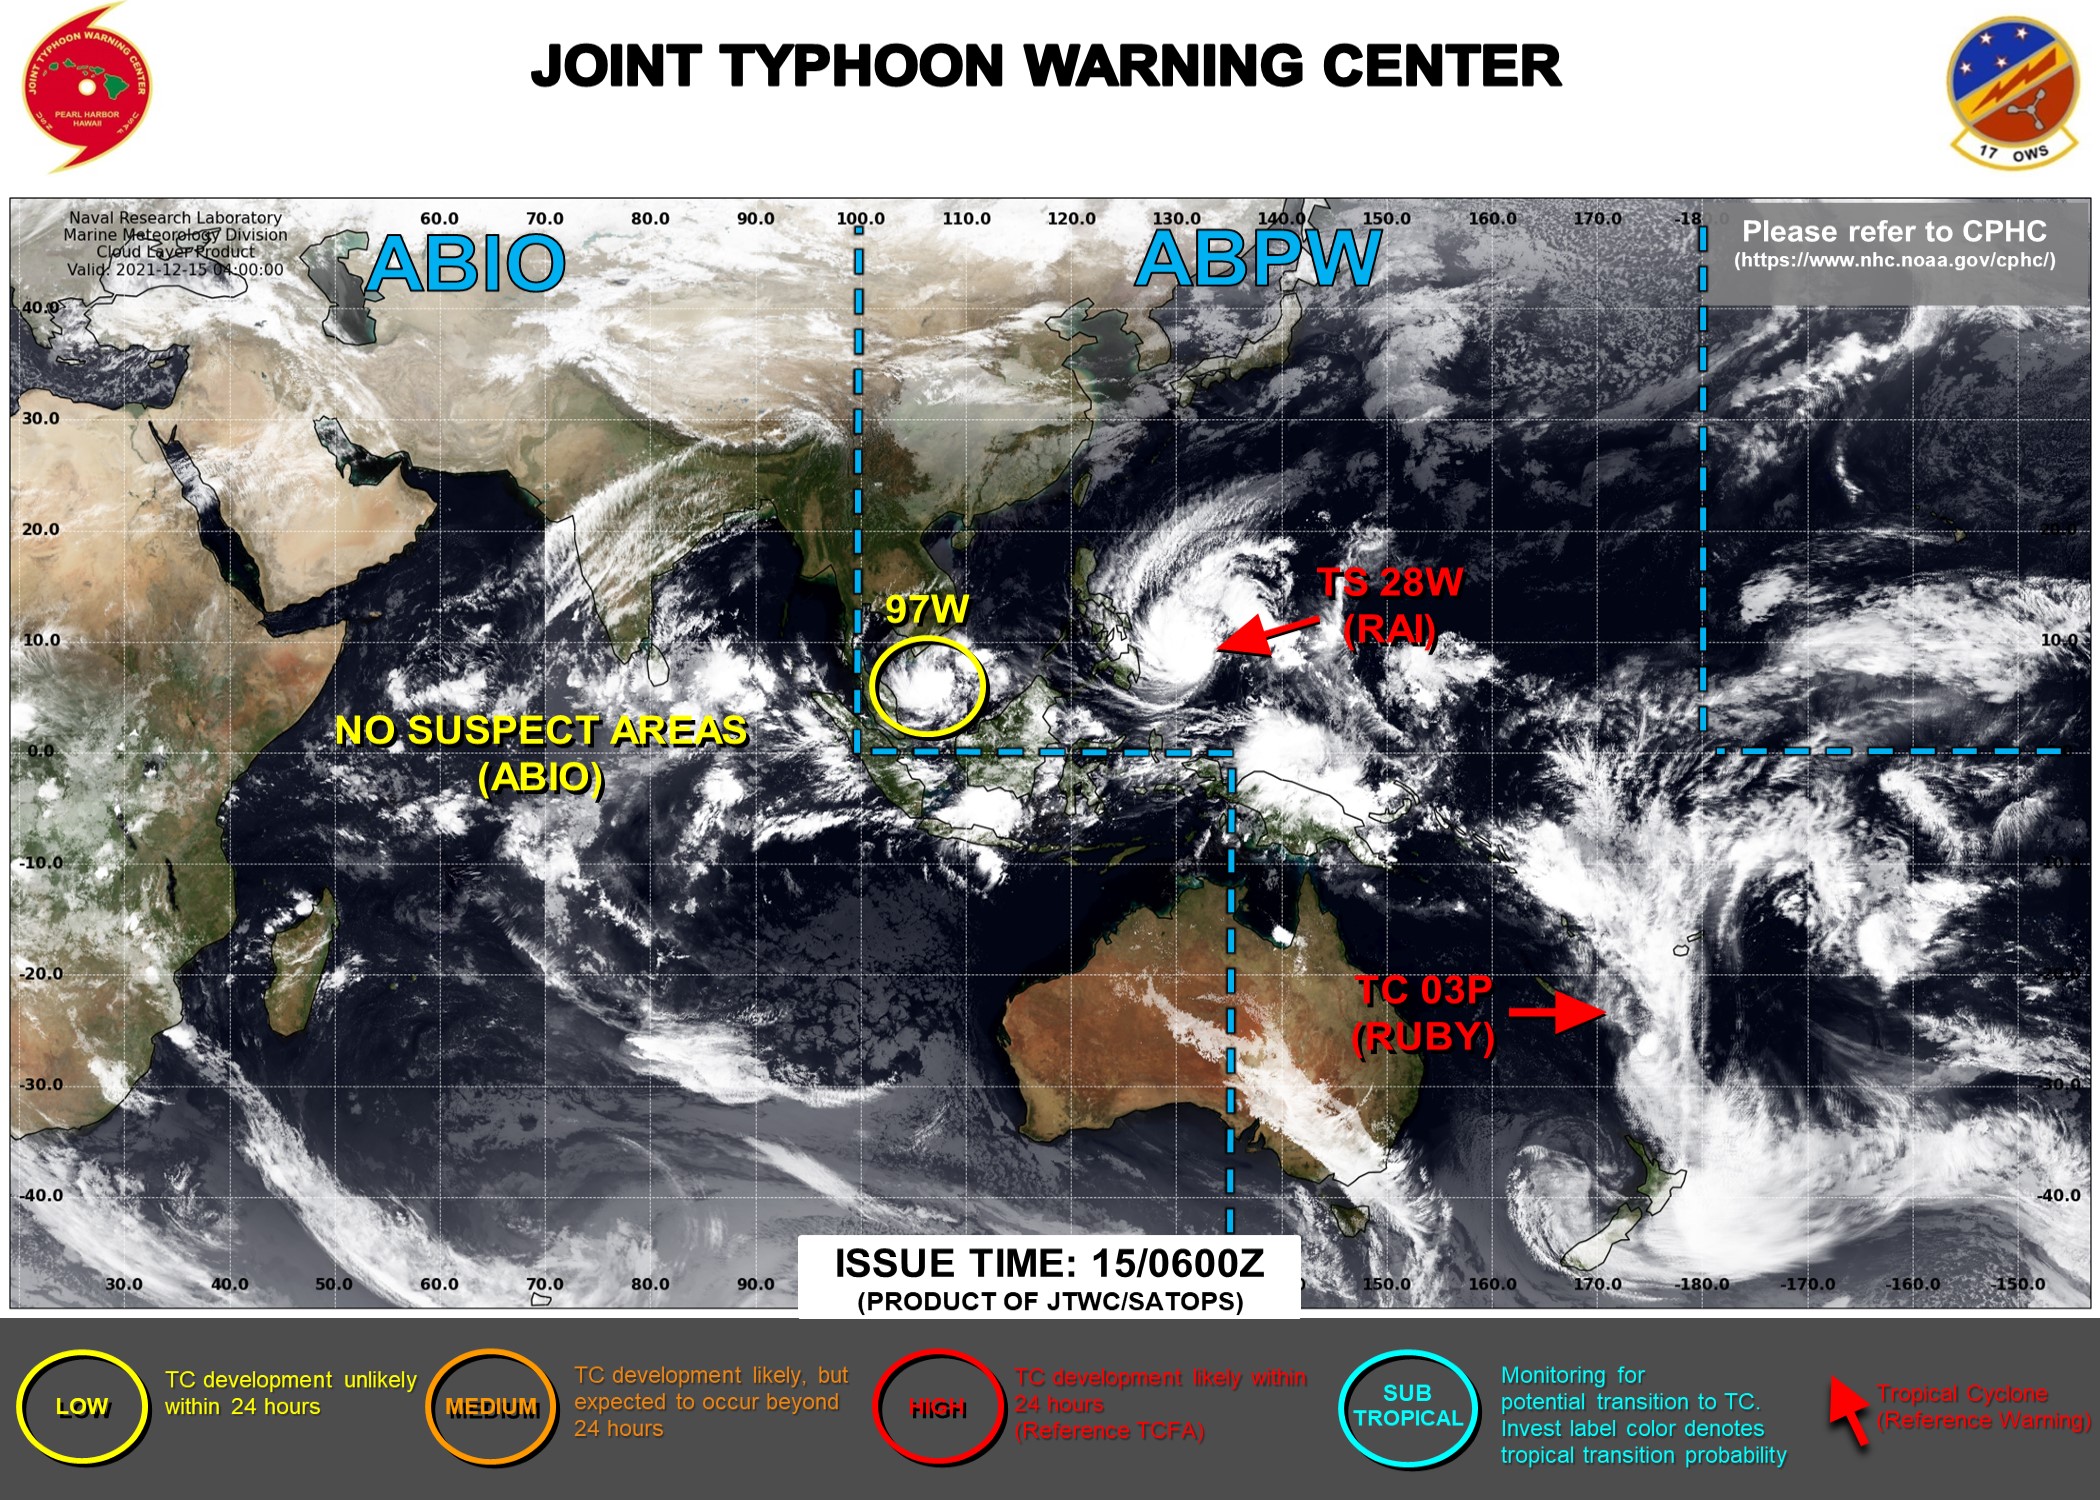 JTWC IS ISSUING 6HOURLY WARNINGS ON 28W(RAI). 6HOURLY WARNINGS WERE TERMINATED ON 03P(RUBY) AT 14/21UTC. 3HOURLY SATELLITE BULLETINS ARE ISSUED ON BOTH SYSTEMS. INVEST 97W IS NOW THE MAP. SEE DETAILS DOWN BELOW.